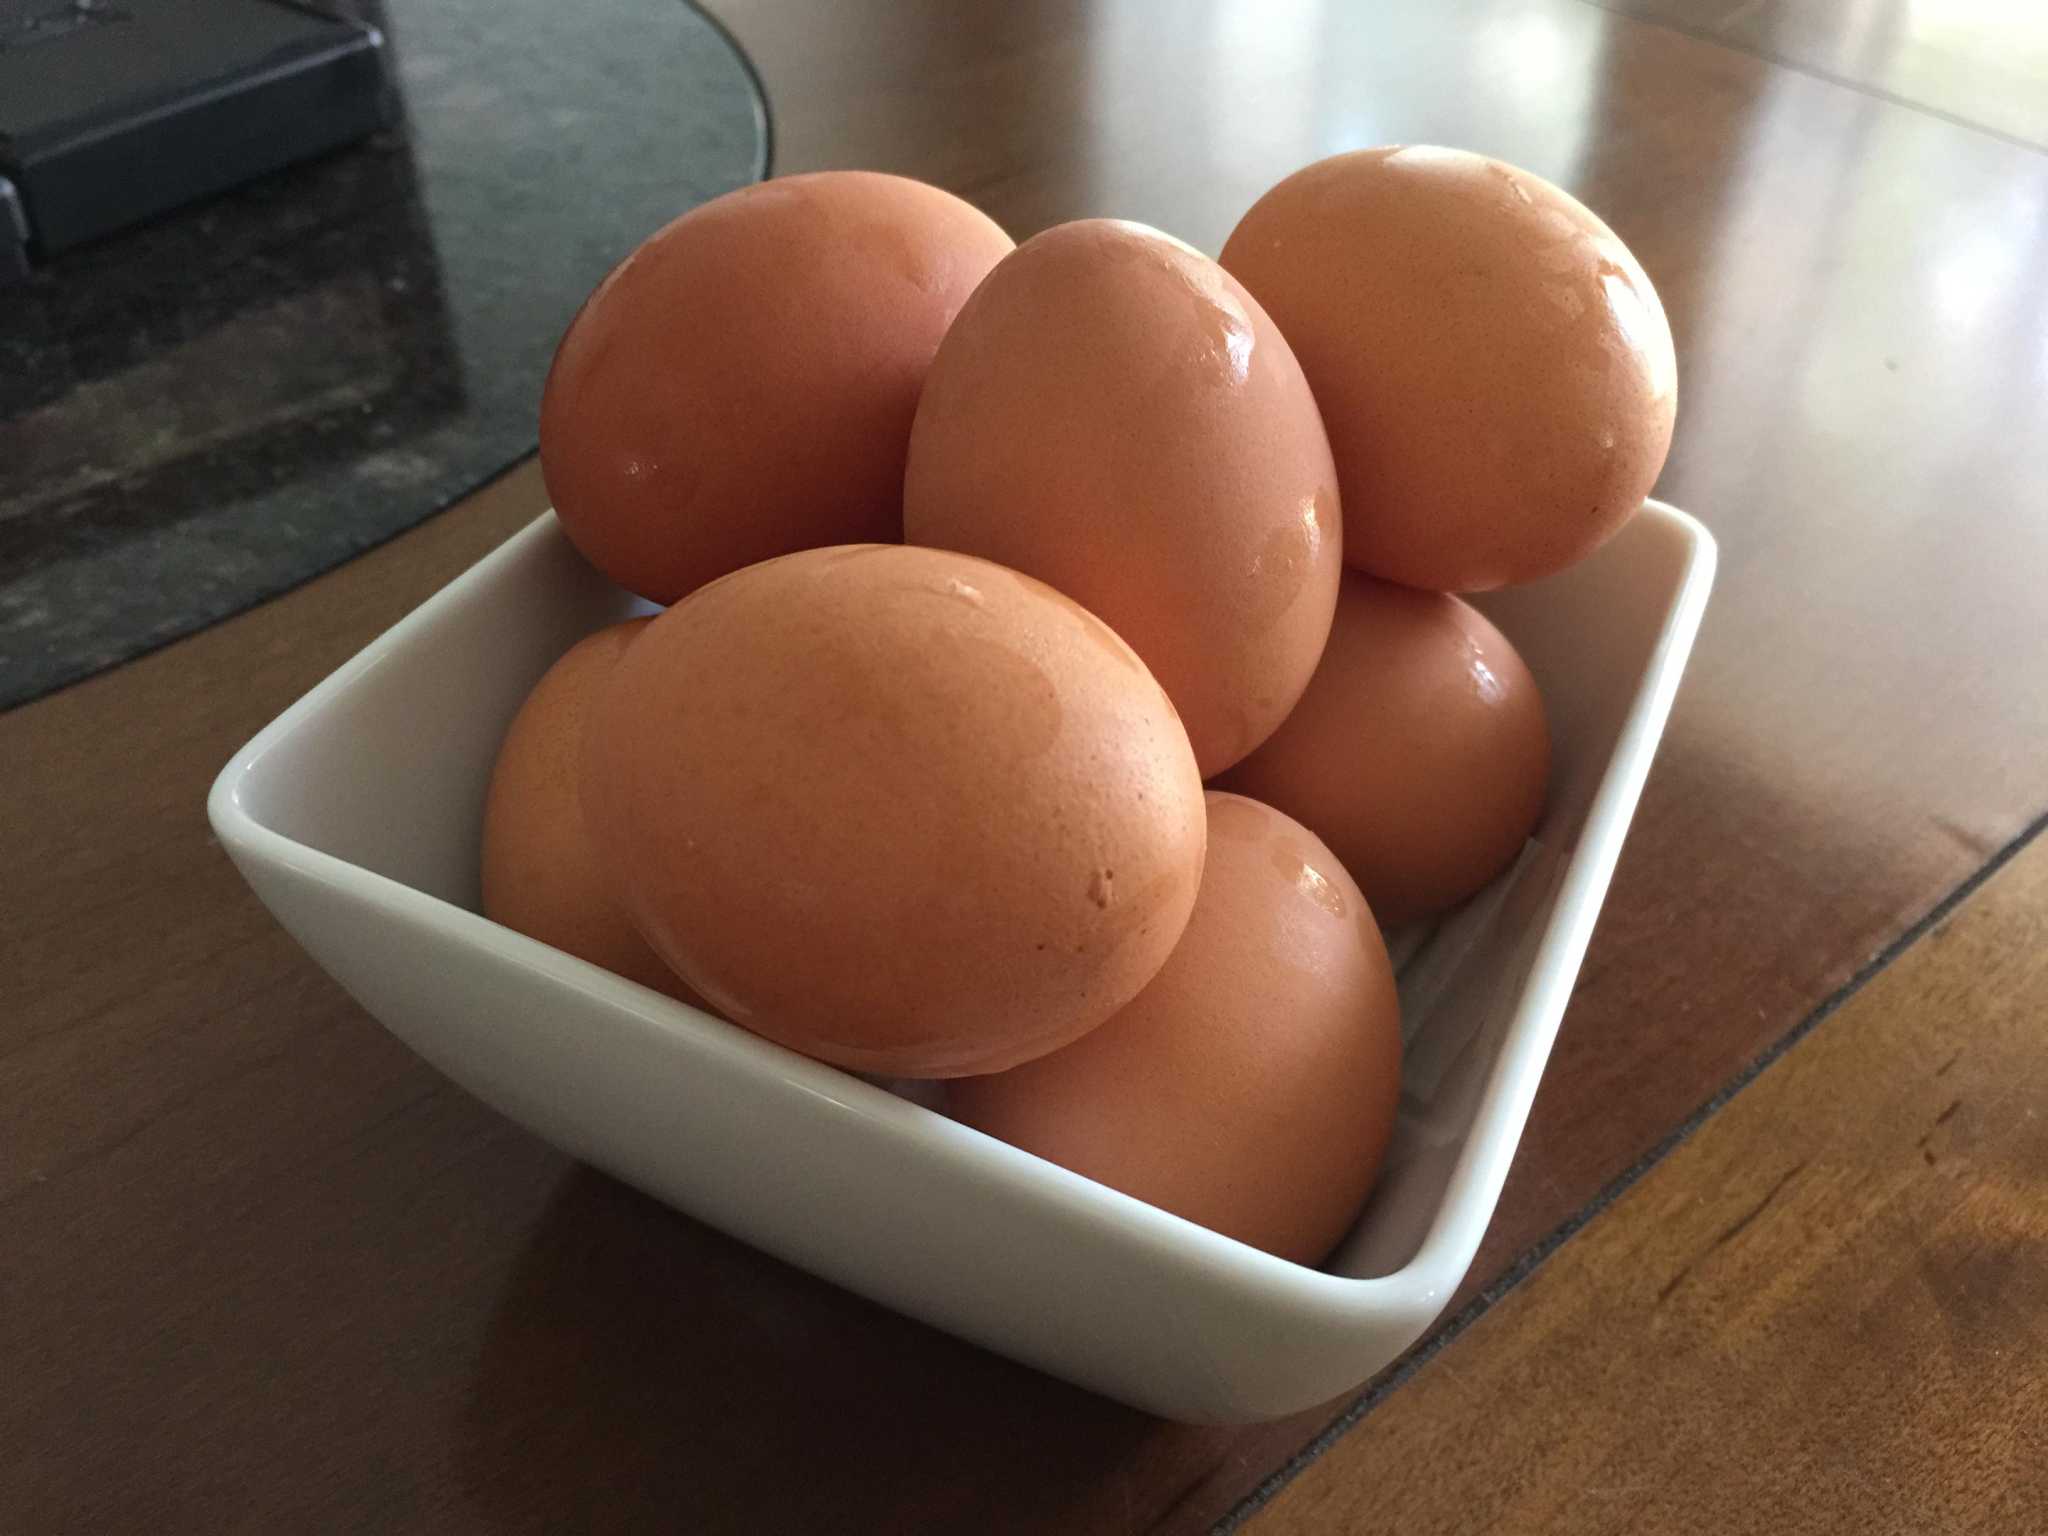 The Best Way To Boil Eggs So Theyre Easy To Peel Your Guide To Which